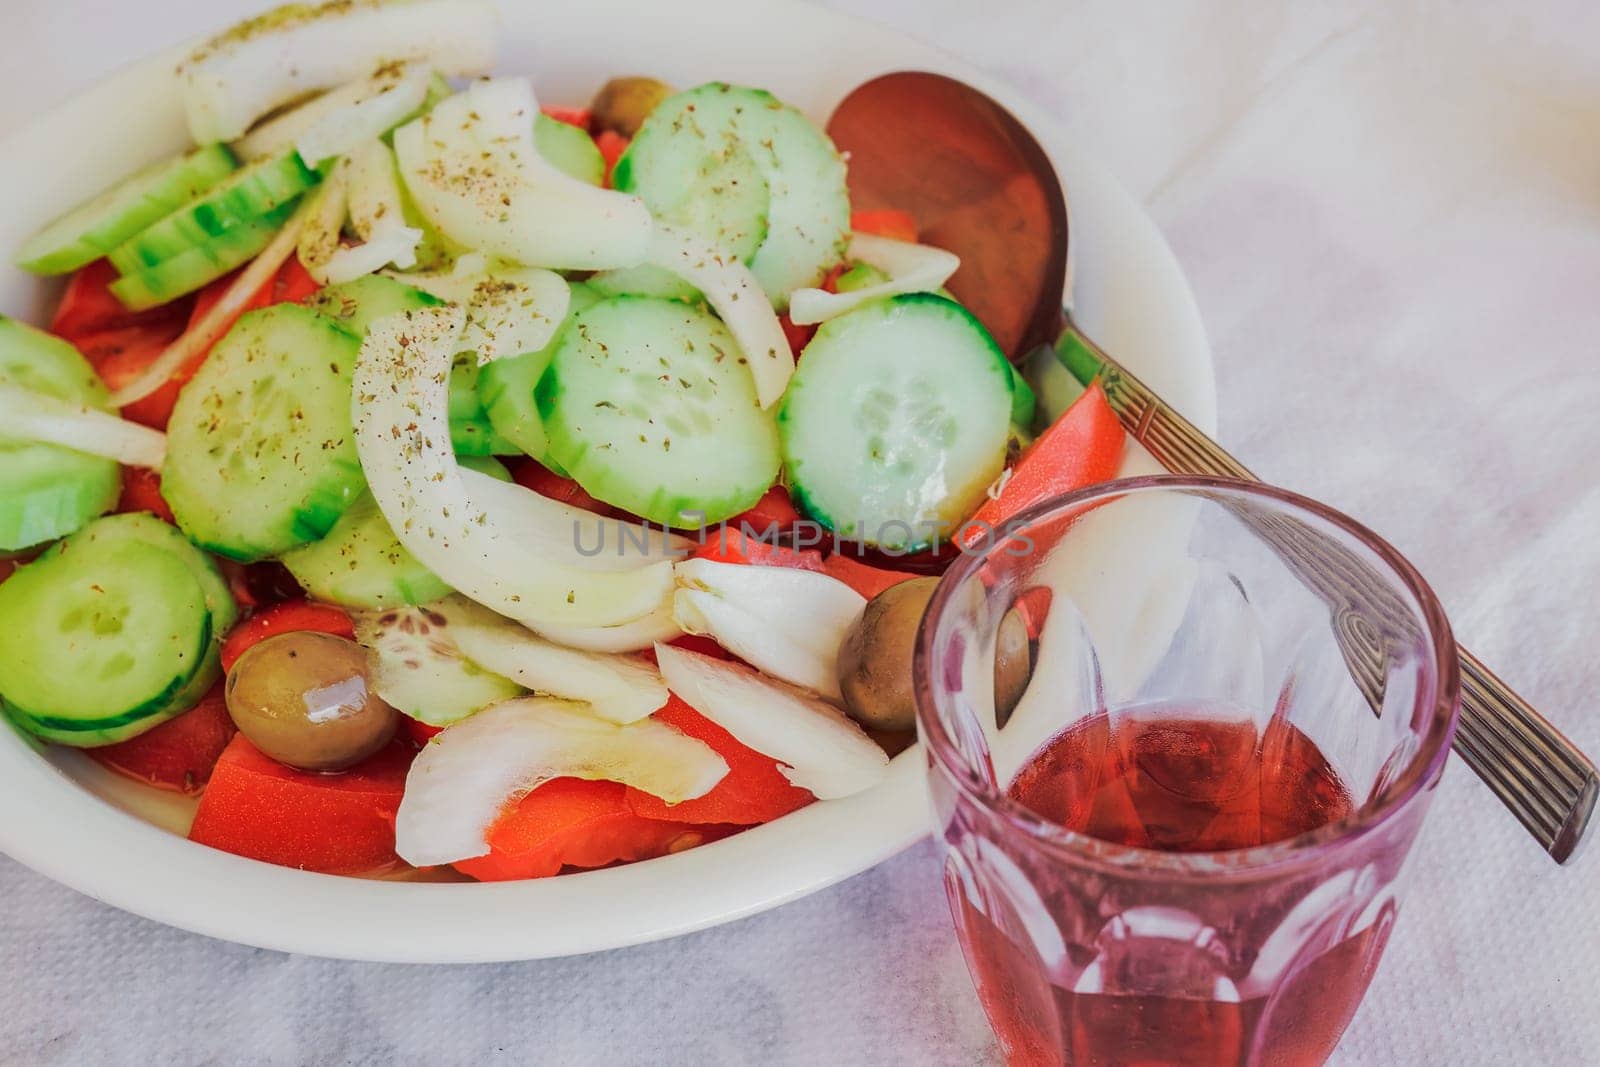 A small glass of red wine next to a dish of served salad with sliced cucumber, tomatoes, onions and olives.